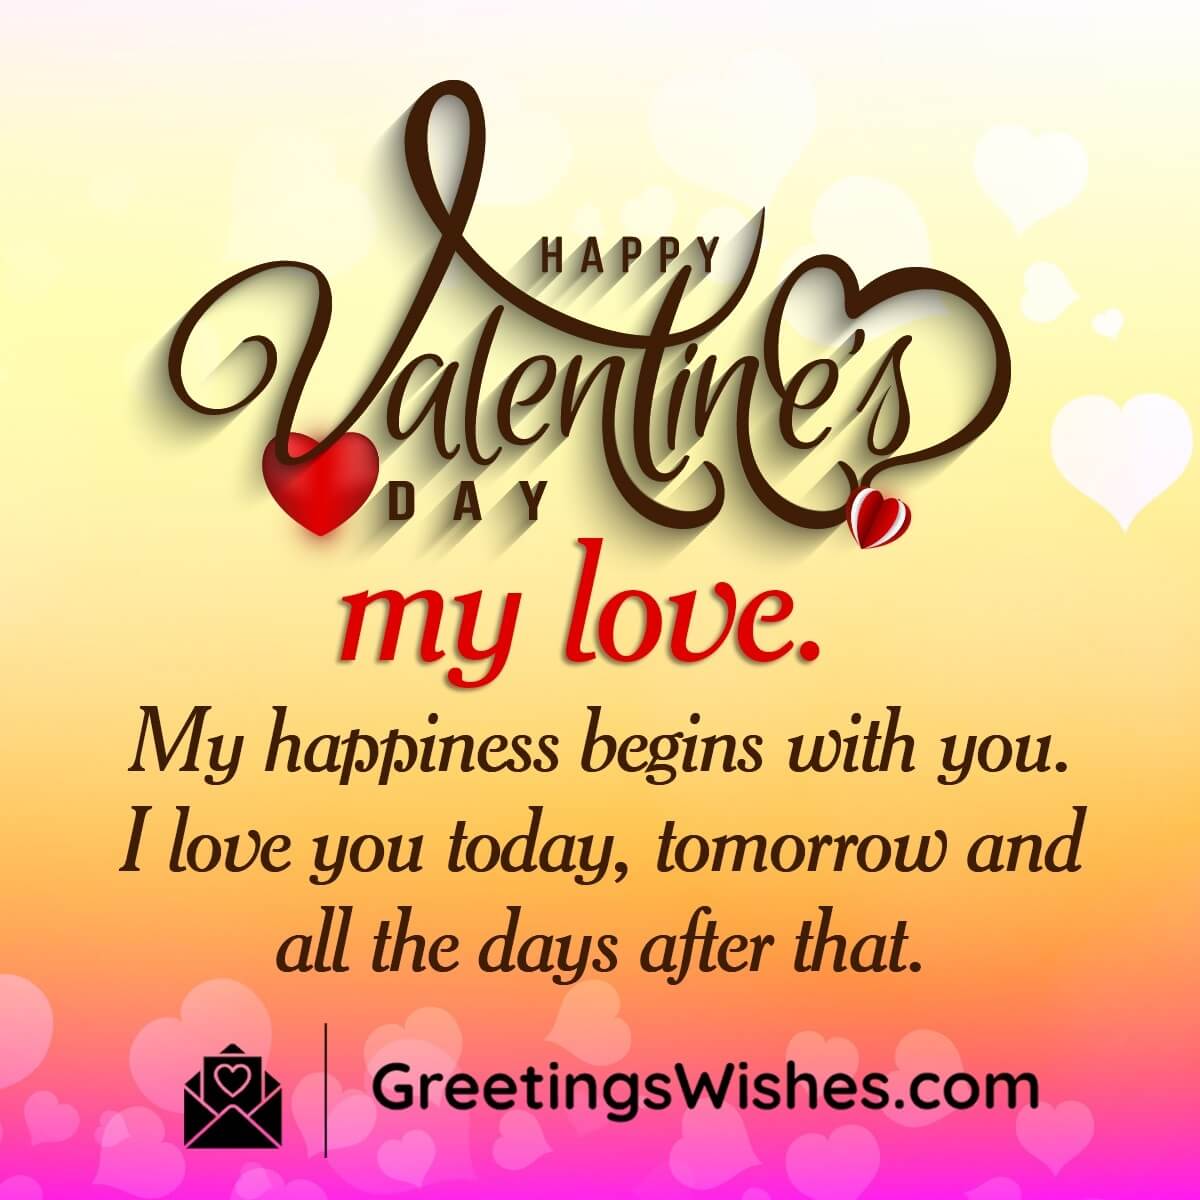 Happy Valentines Day Wish For My Love